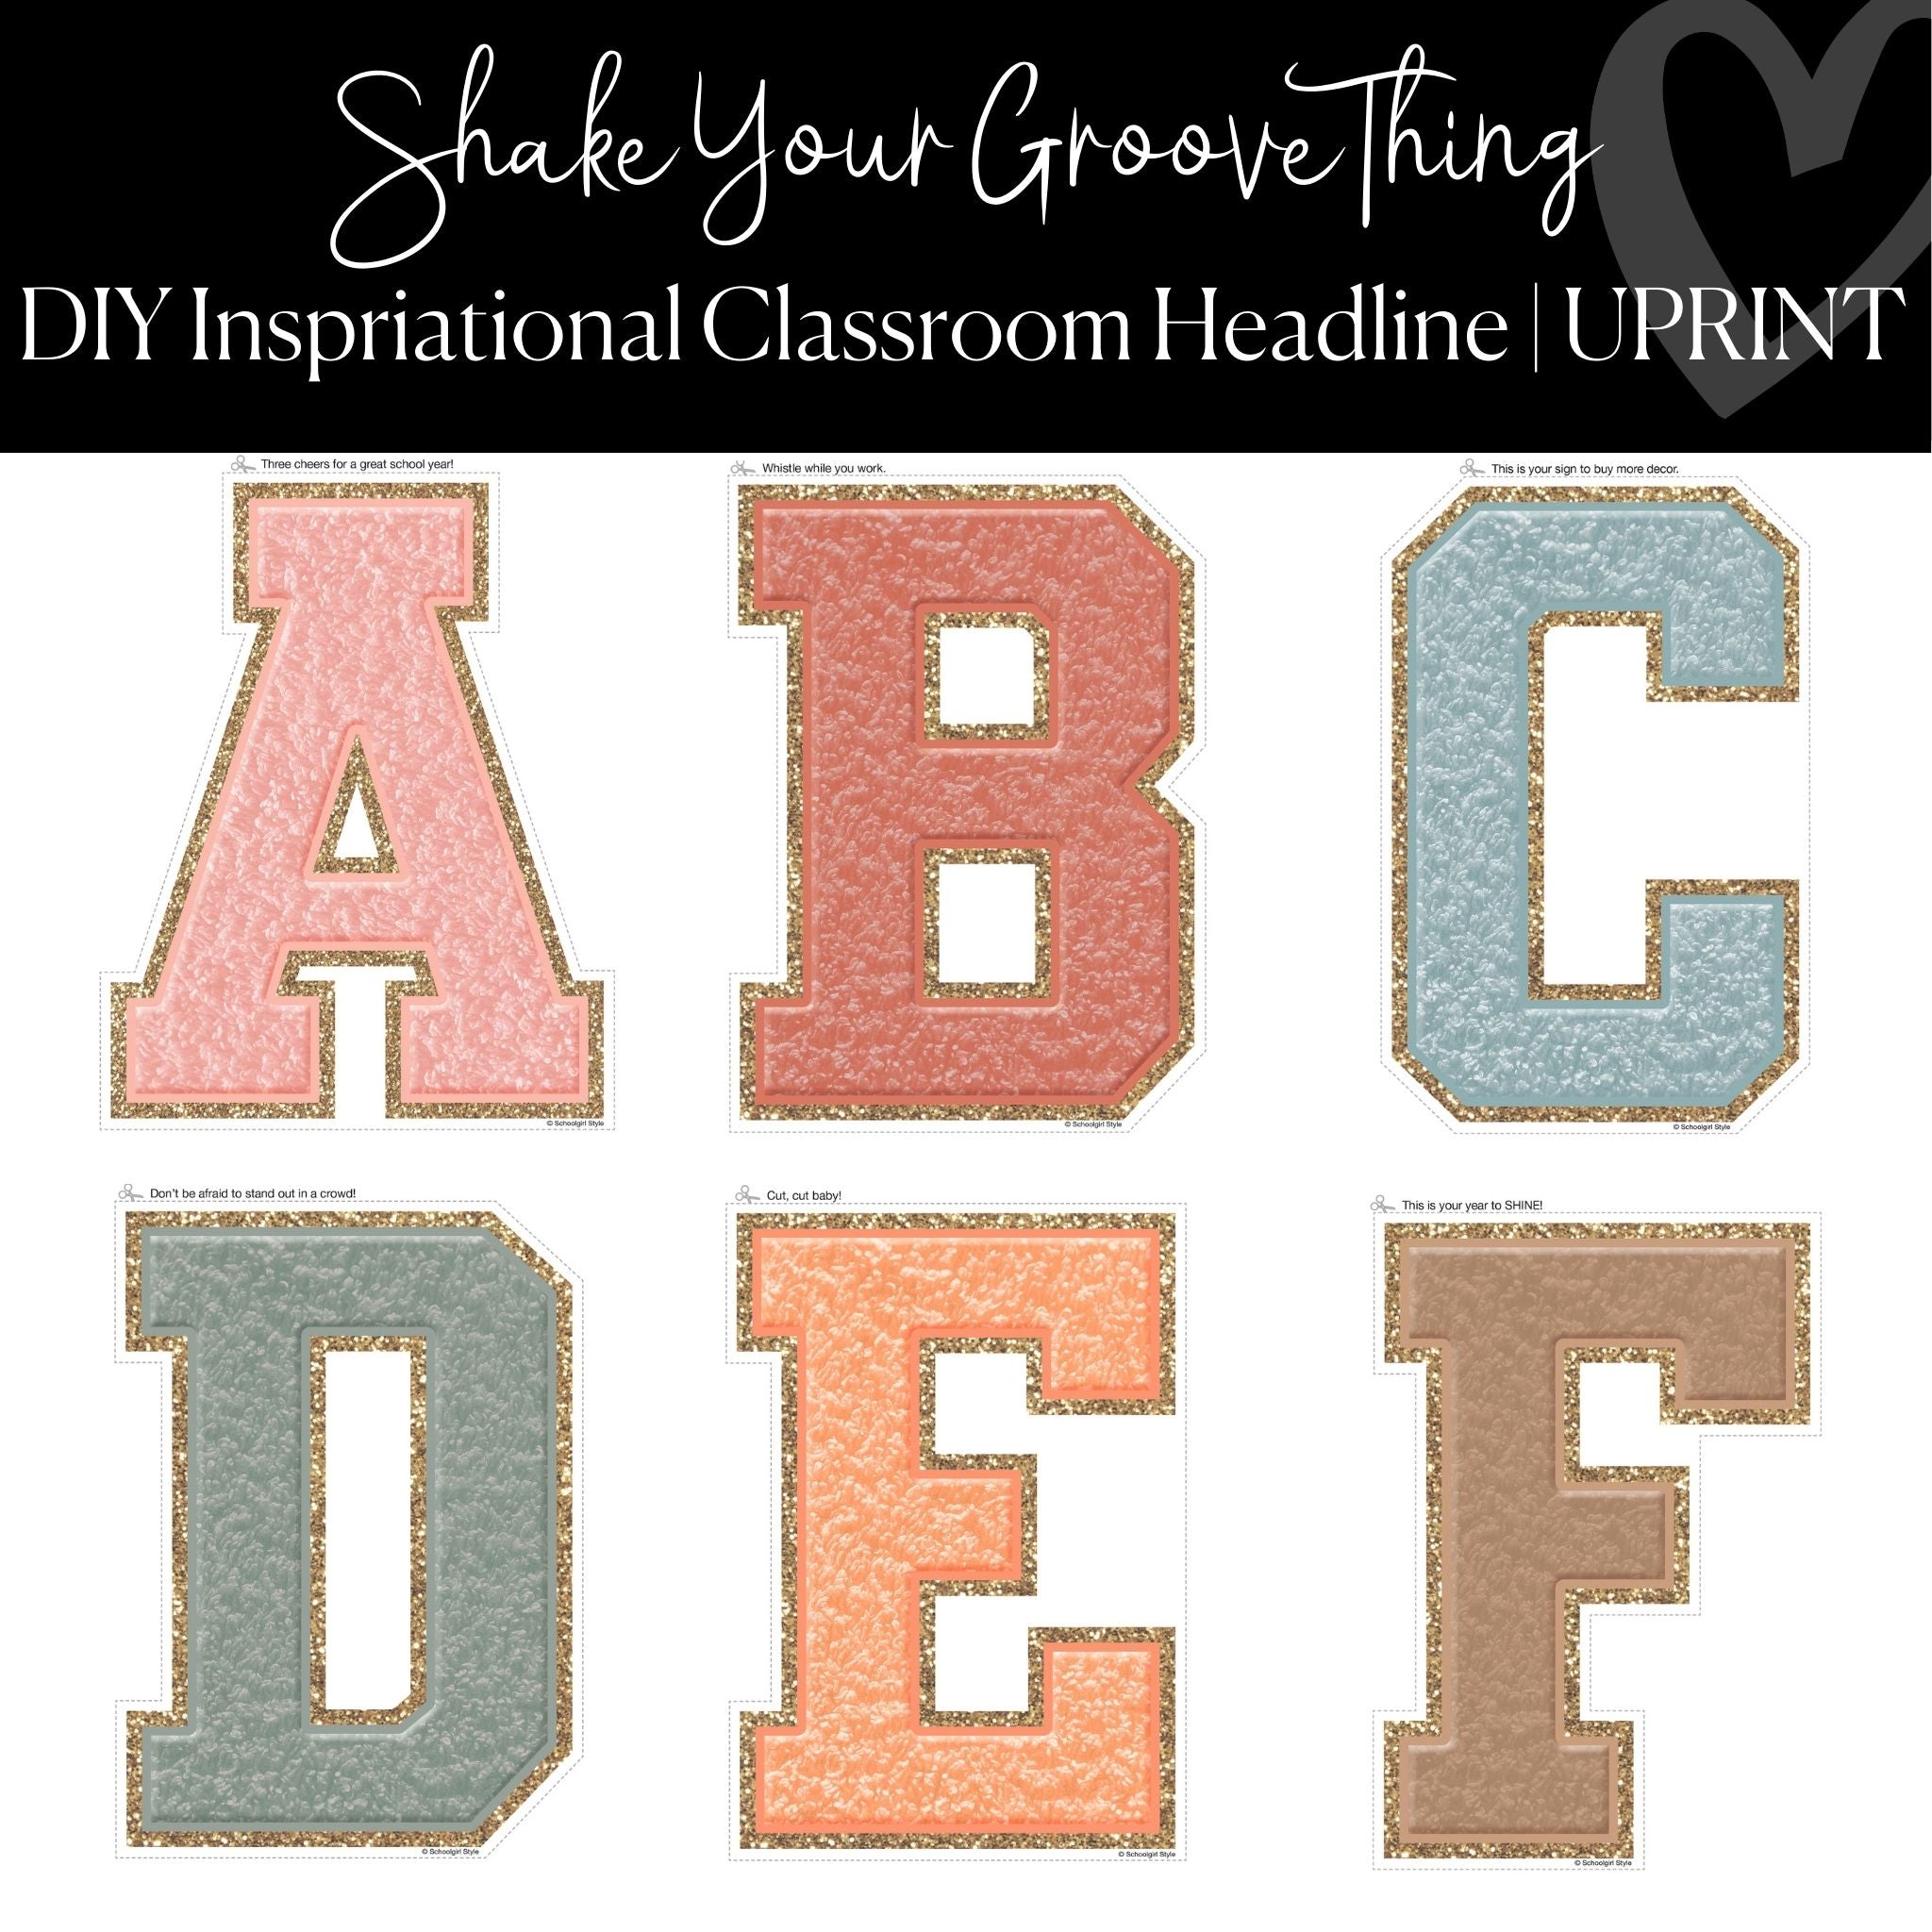 How to Make Your Own Bulletin Board Letters